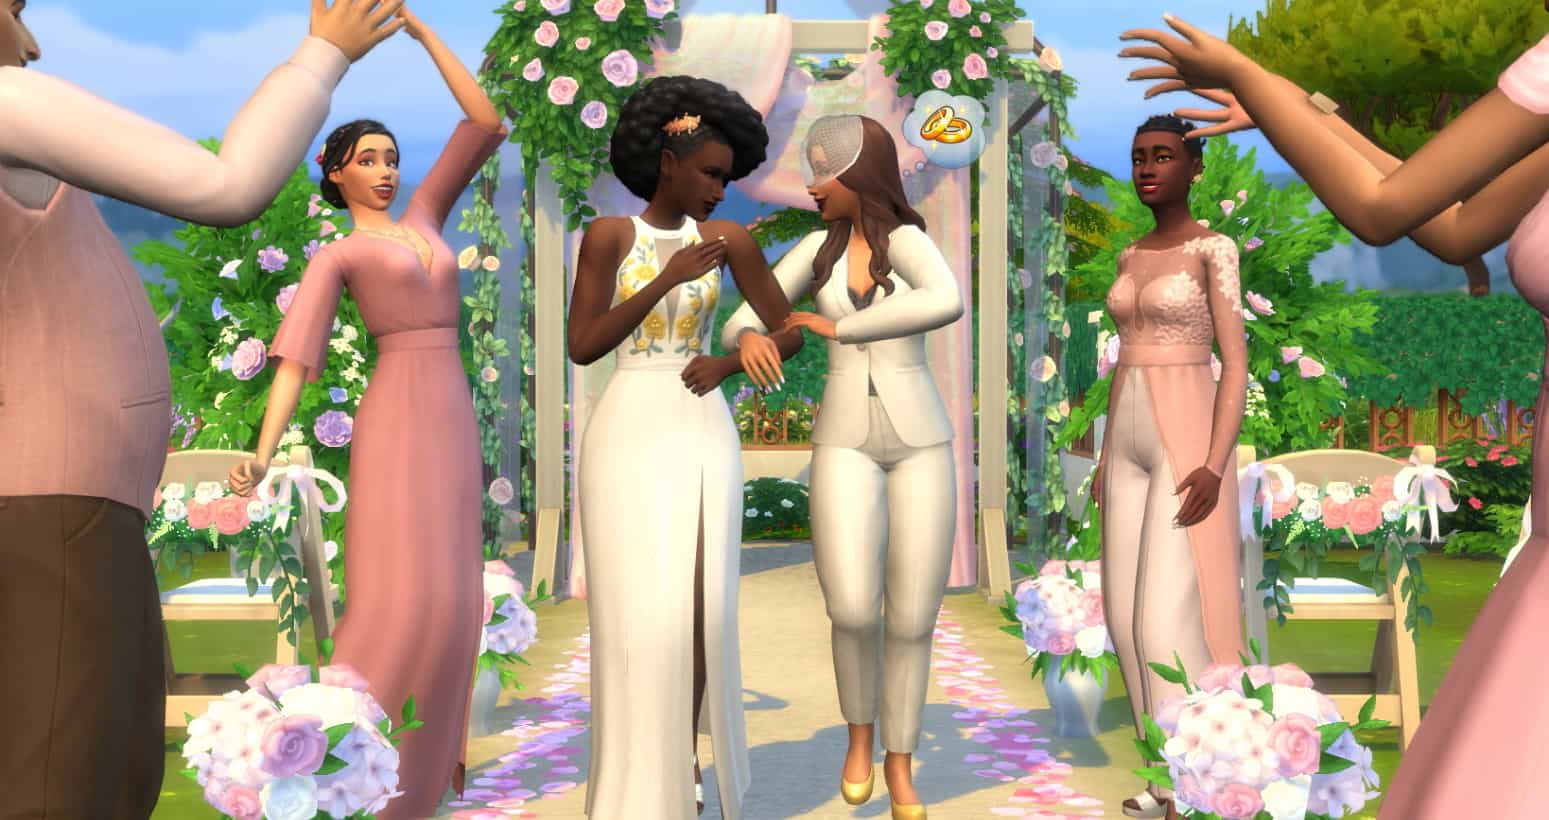 Sims 4: My Wedding Stories official blog post and screenshots